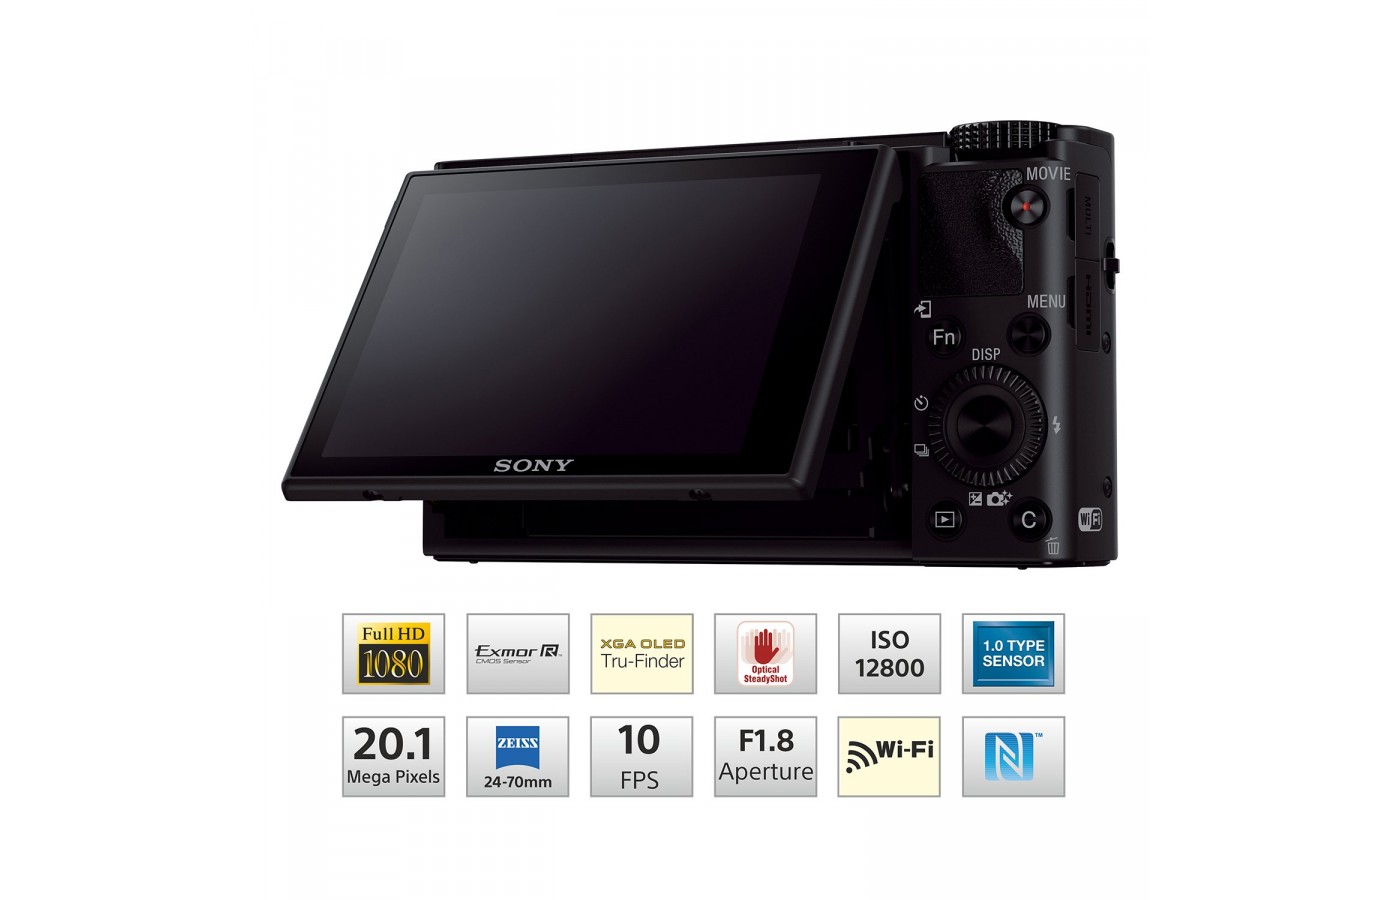 Sony has not put touchscreens on their cameras.